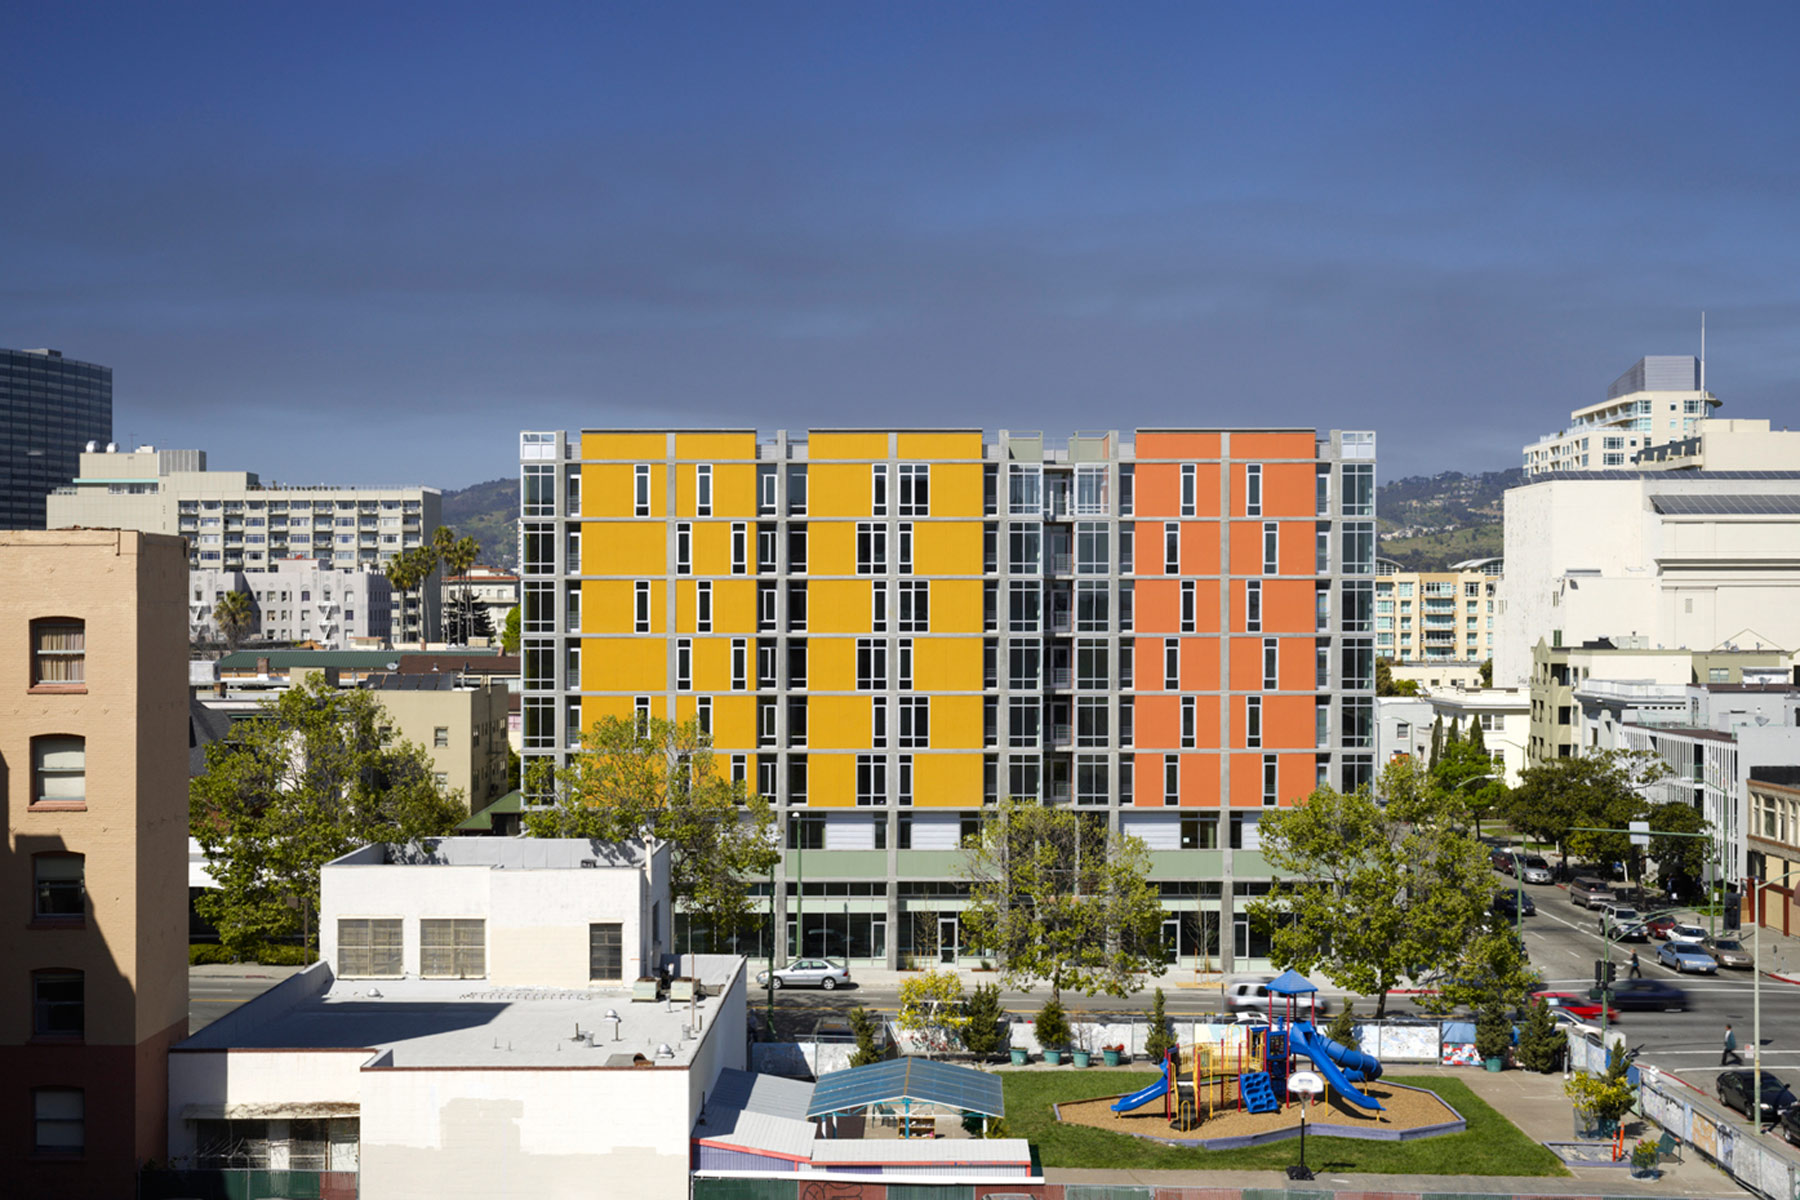 The Madison at 14th Street Apartments in Oakland provides affordable housing and supportive services for low-income families and youth at risk of homelessness.